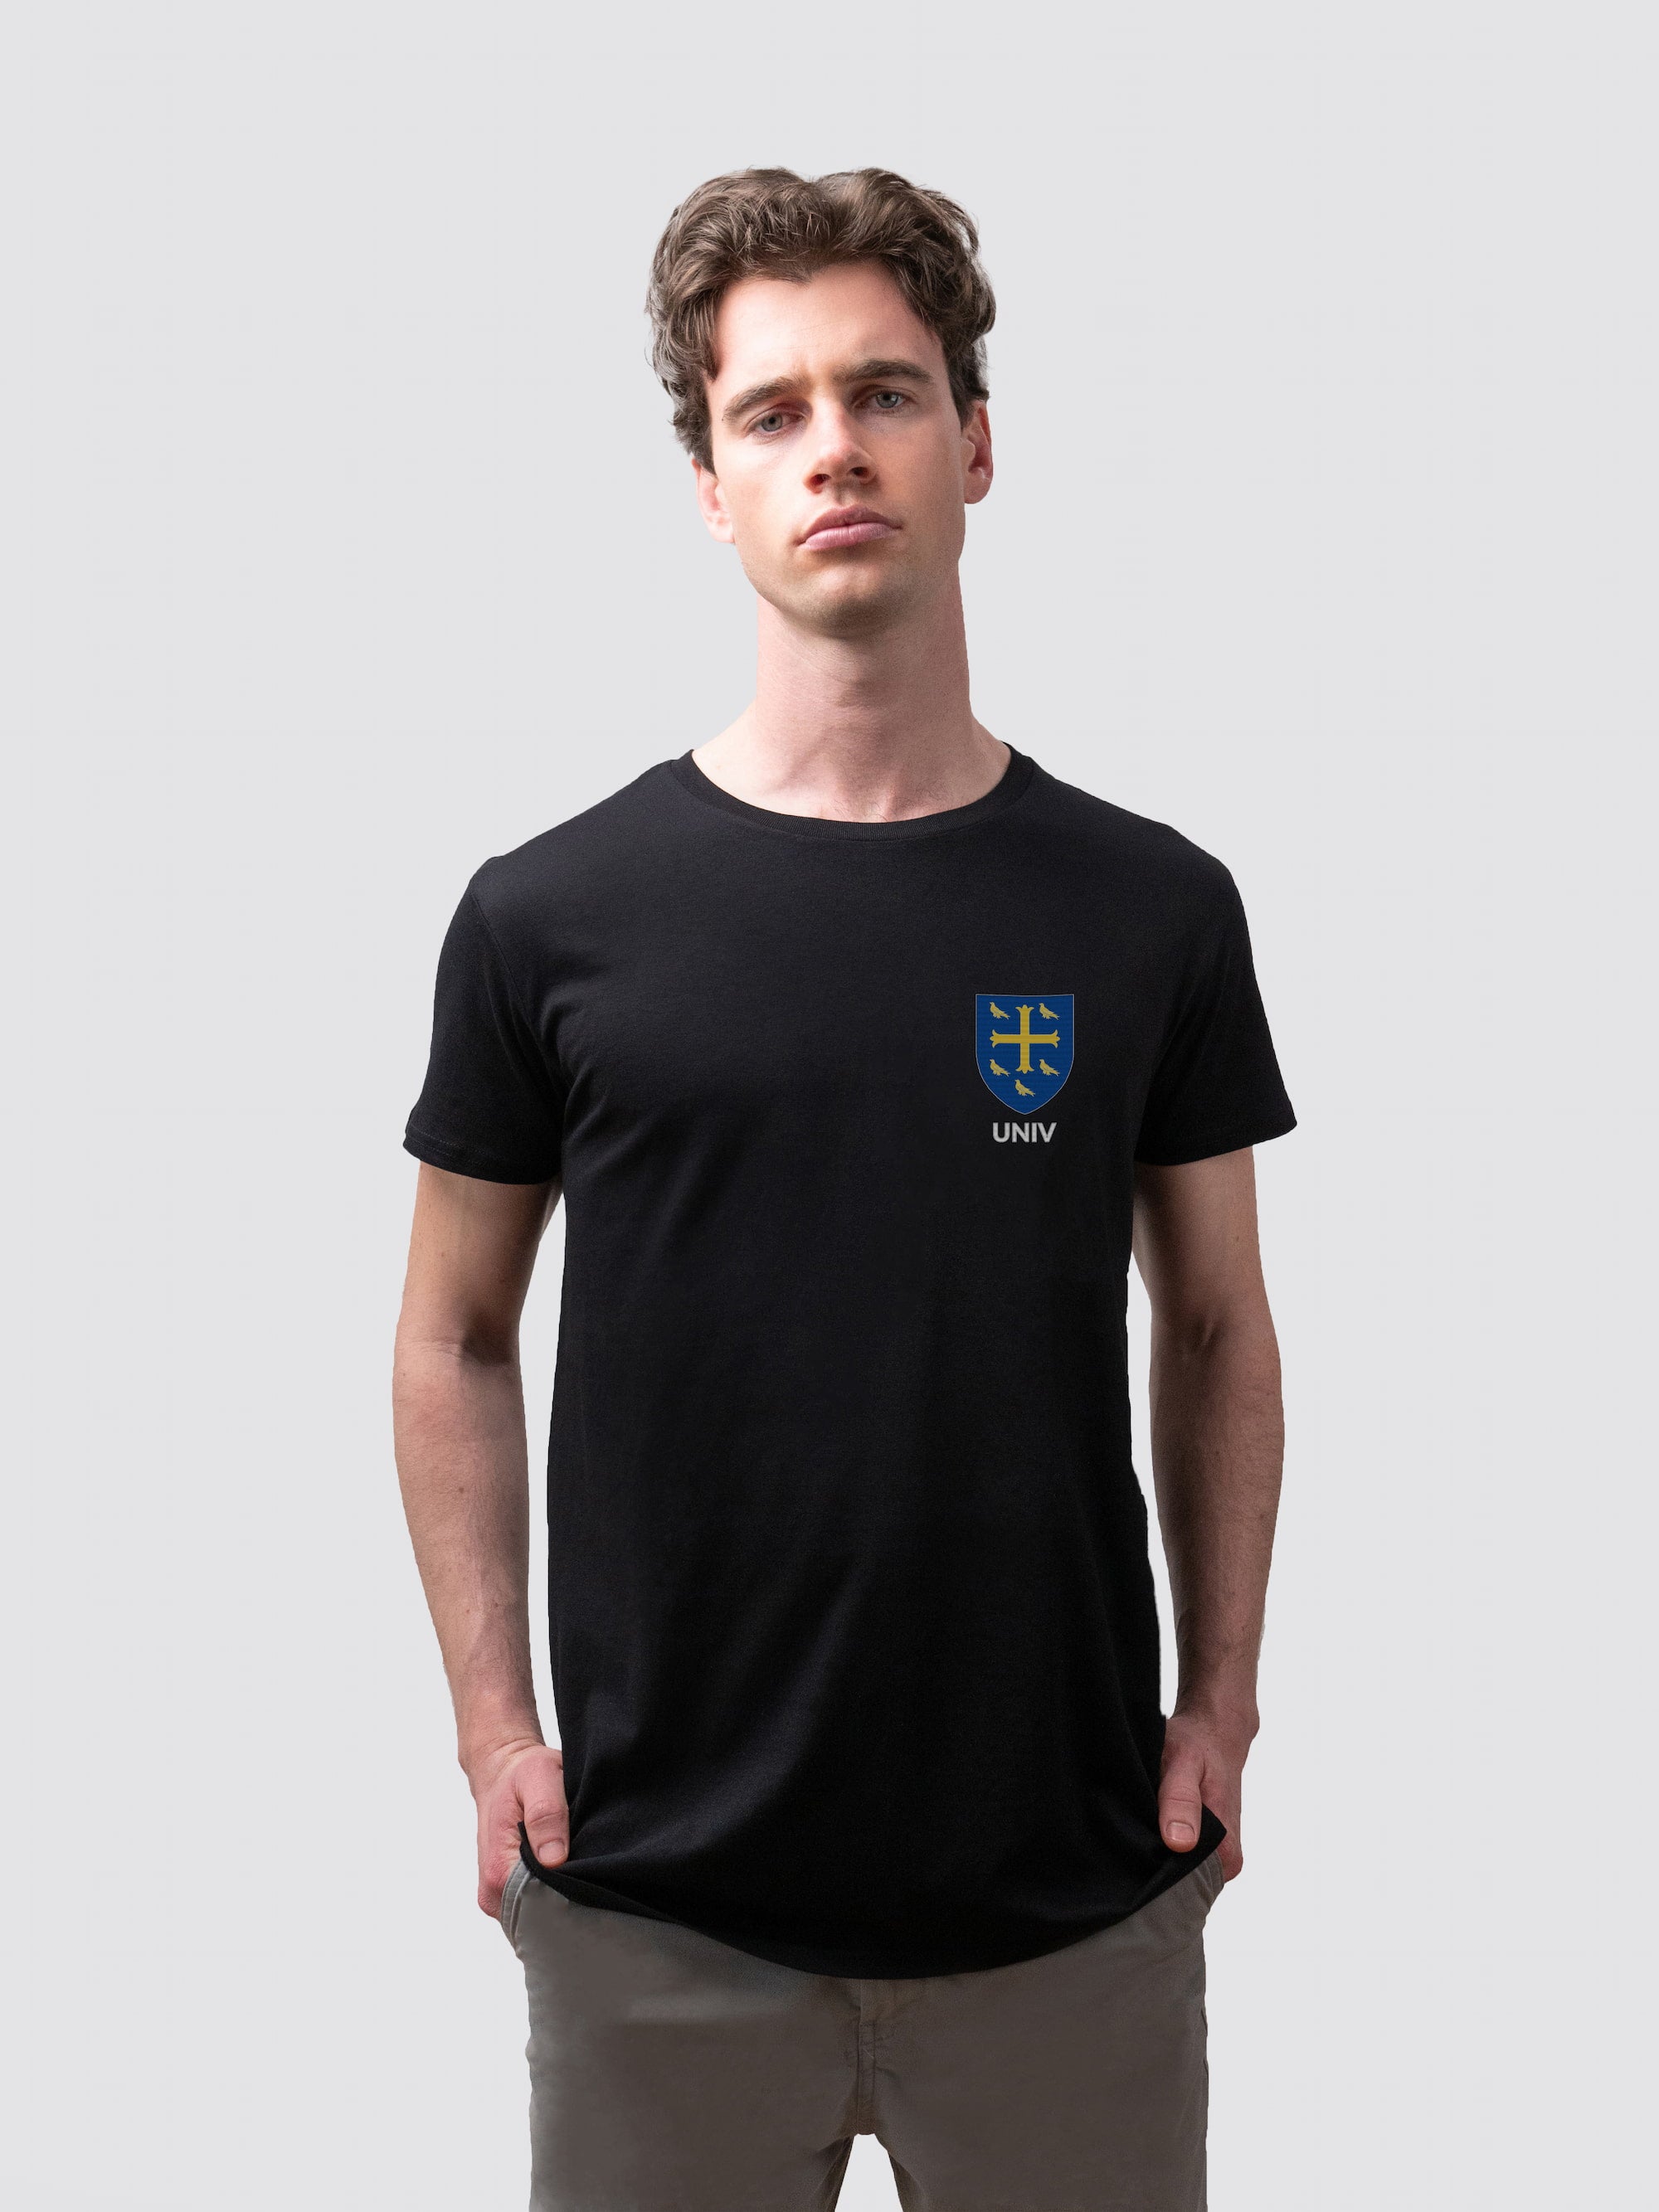 Sustainable University t-shirt, made from organic cotton